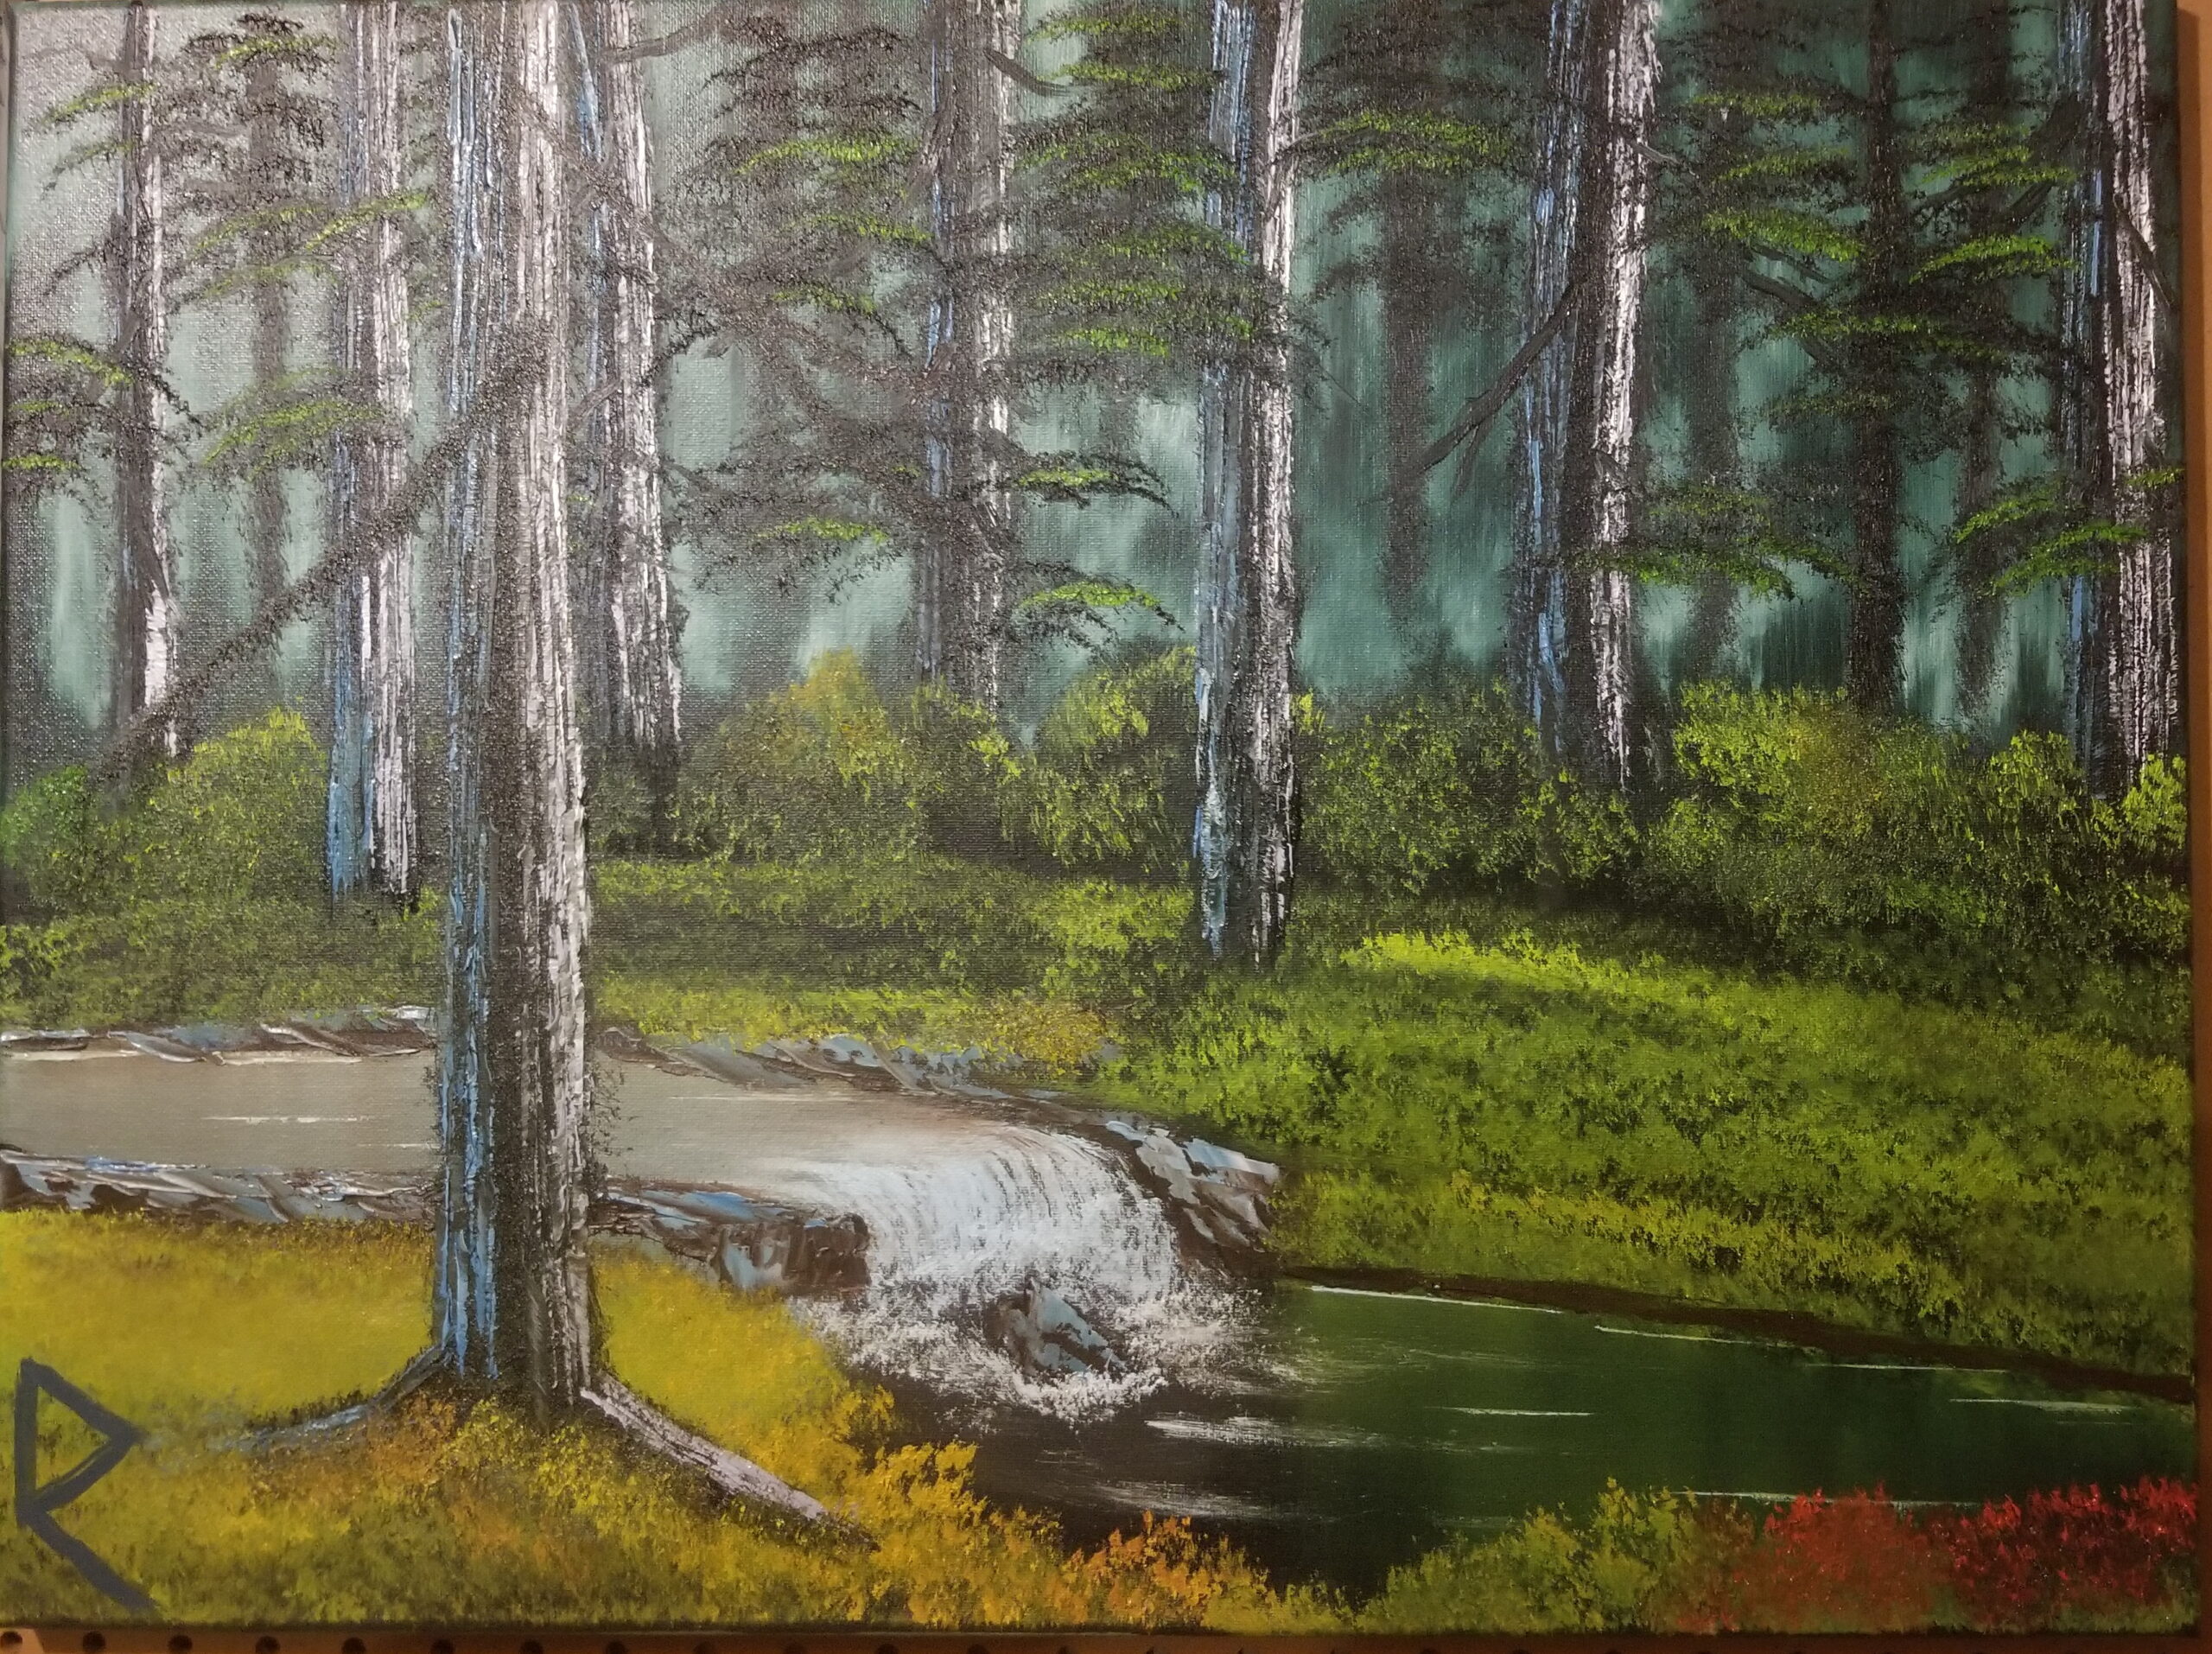 Oil painting of a dark green forest on 18"x24" canvas. Green/blue background with a rushing stream and foliage in green, orange and red.